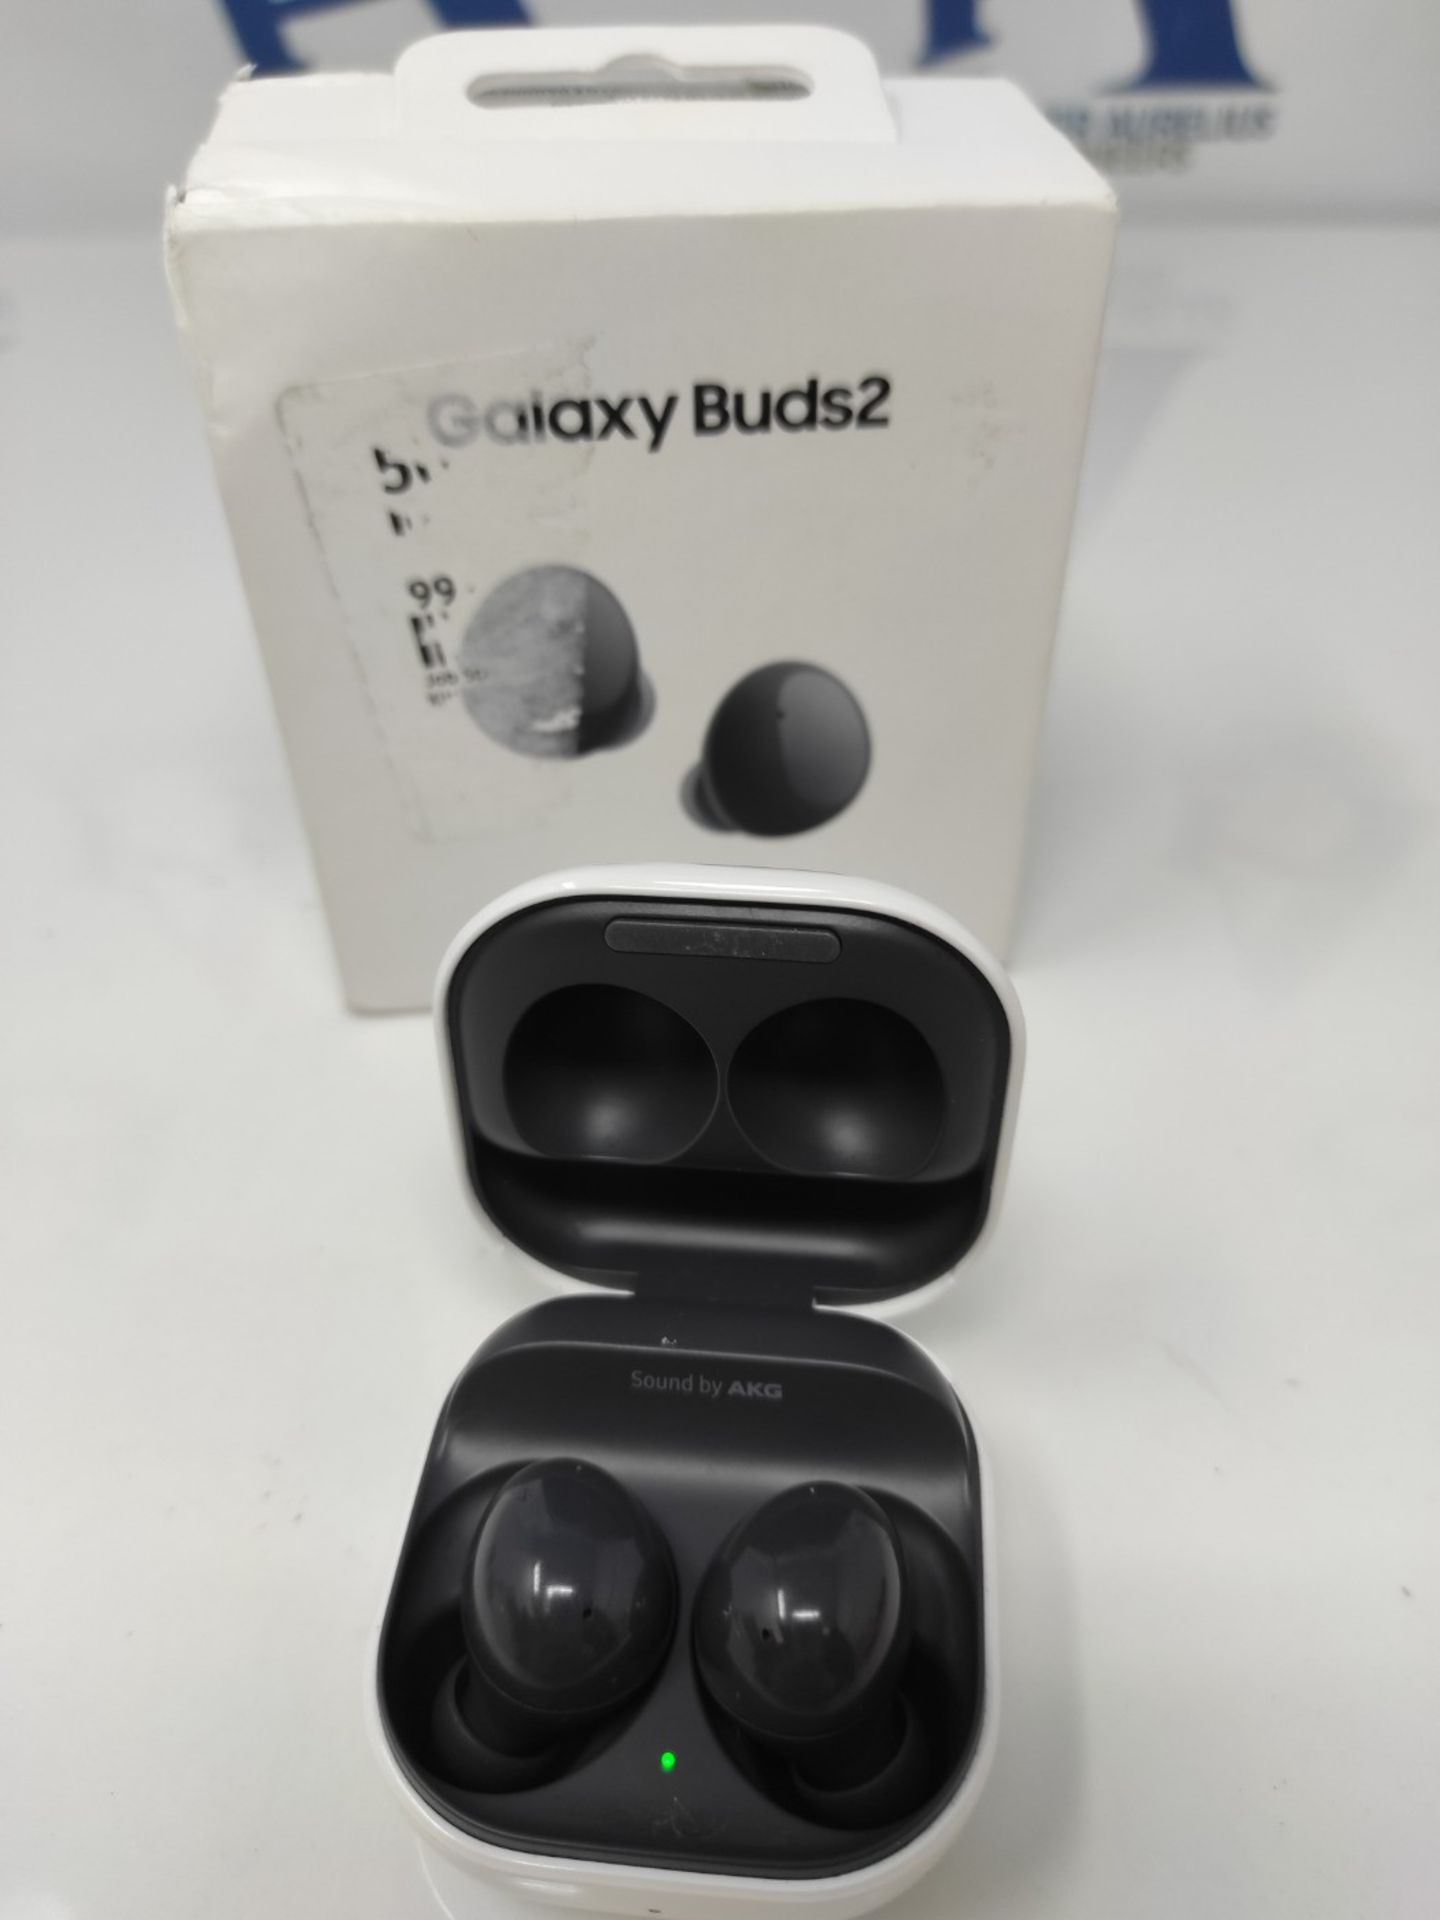 RRP £133.00 Samsung Galaxy Buds2 Bluetooth Earbuds, True Wireless, Noise Cancelling, Charging Case - Image 2 of 2